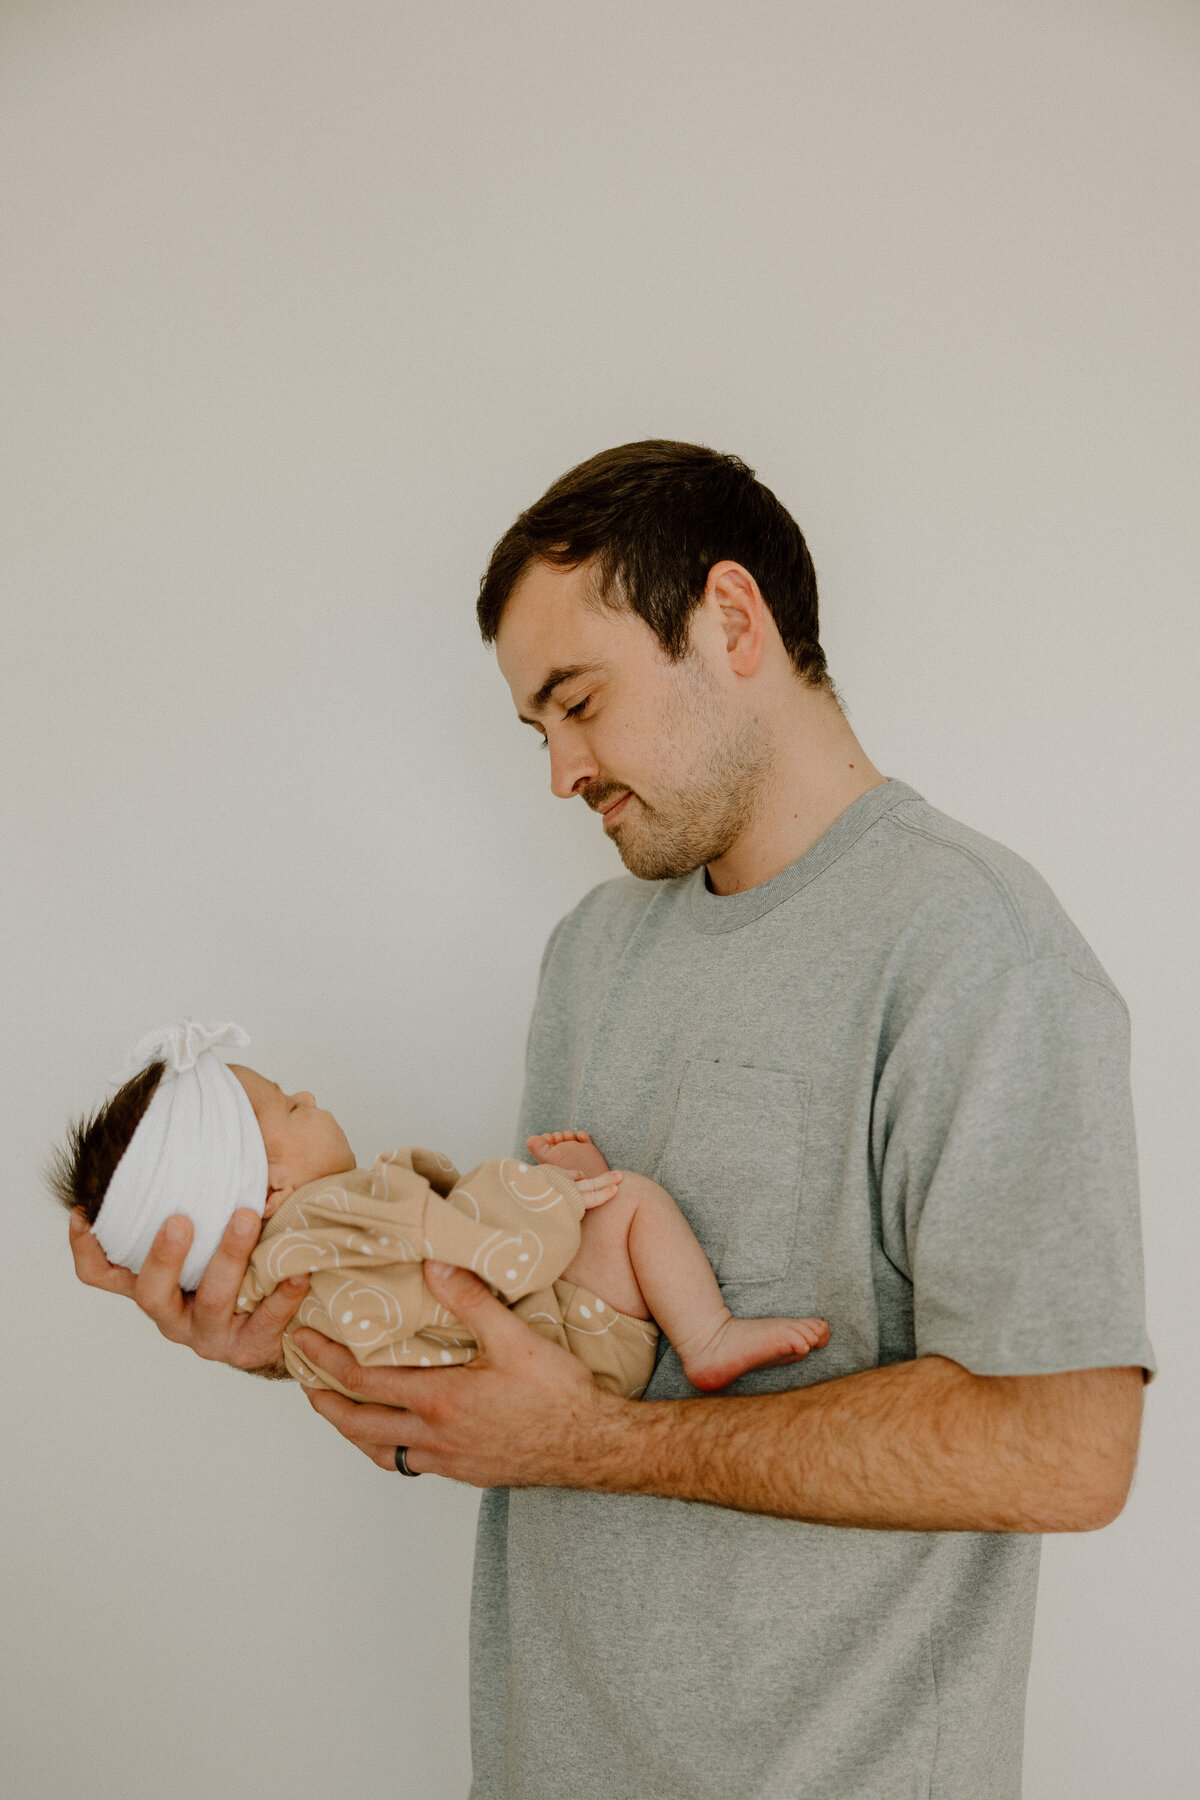 in-home-newborn-lifestyle-session-lancaster-pa-cara-marie-photography-37